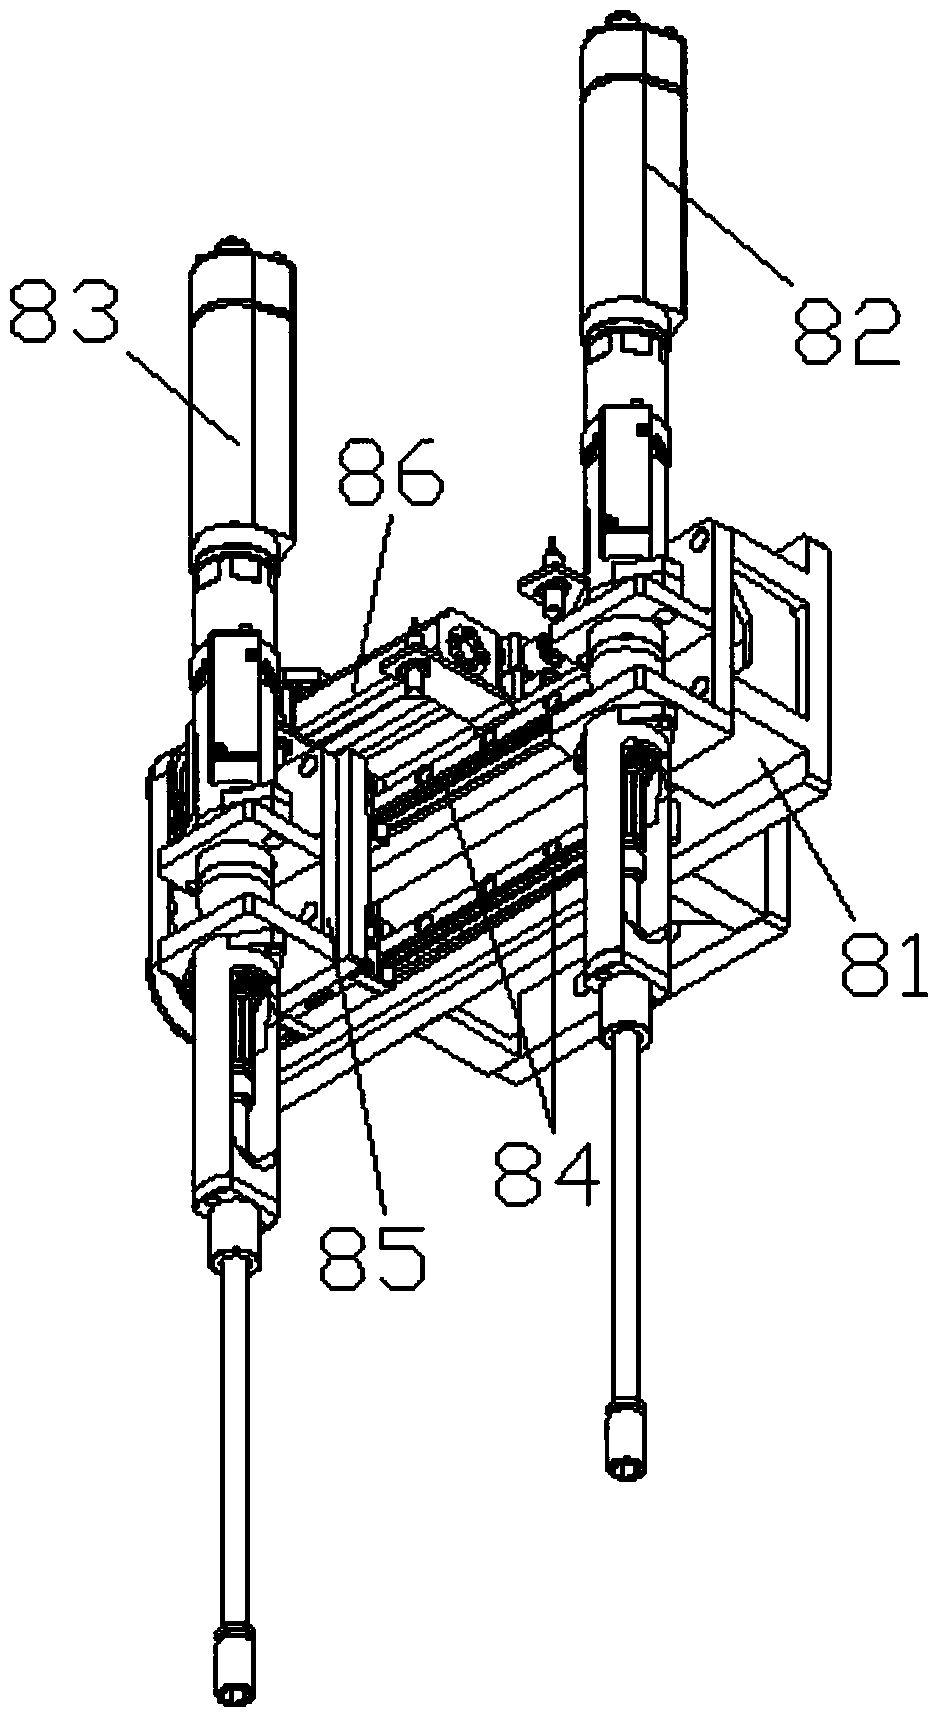 An adjustable double-station bolt tightening device